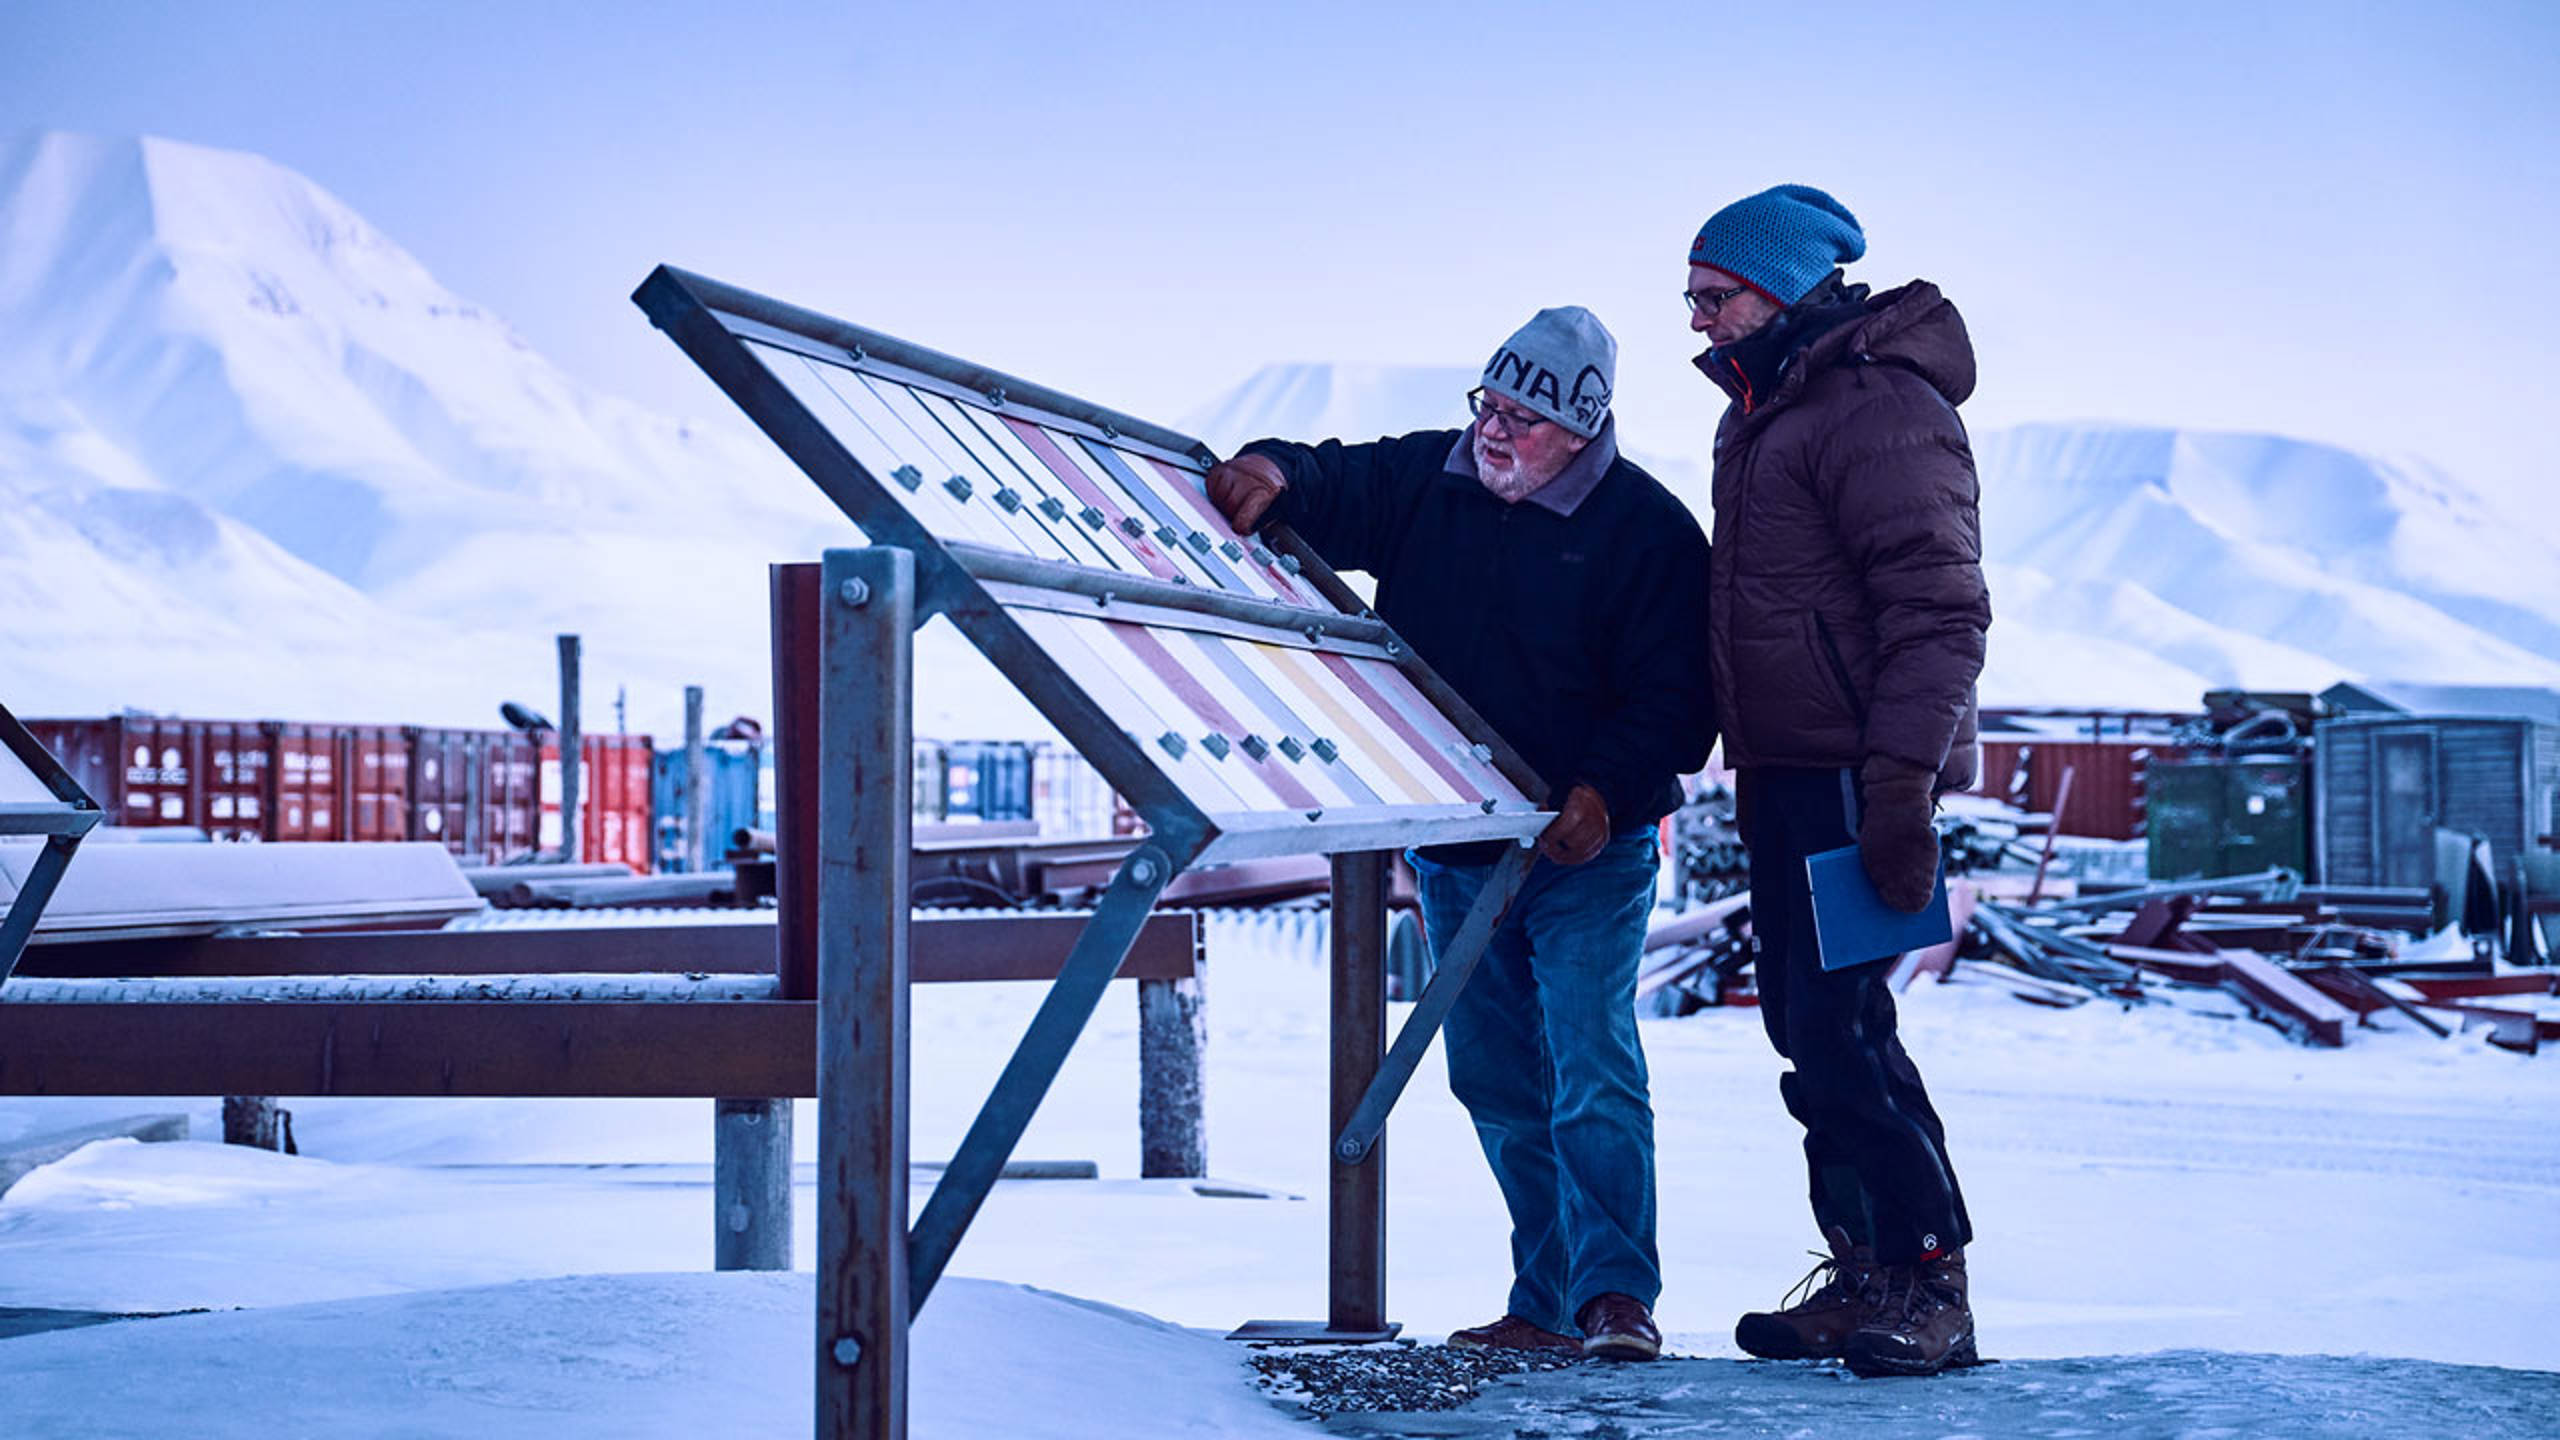 Jotun performs tests of paints and coatings at arctic temperatures going down to –20 oC in Svalbard, a Norwegian archipelago in the Arctic Ocean.